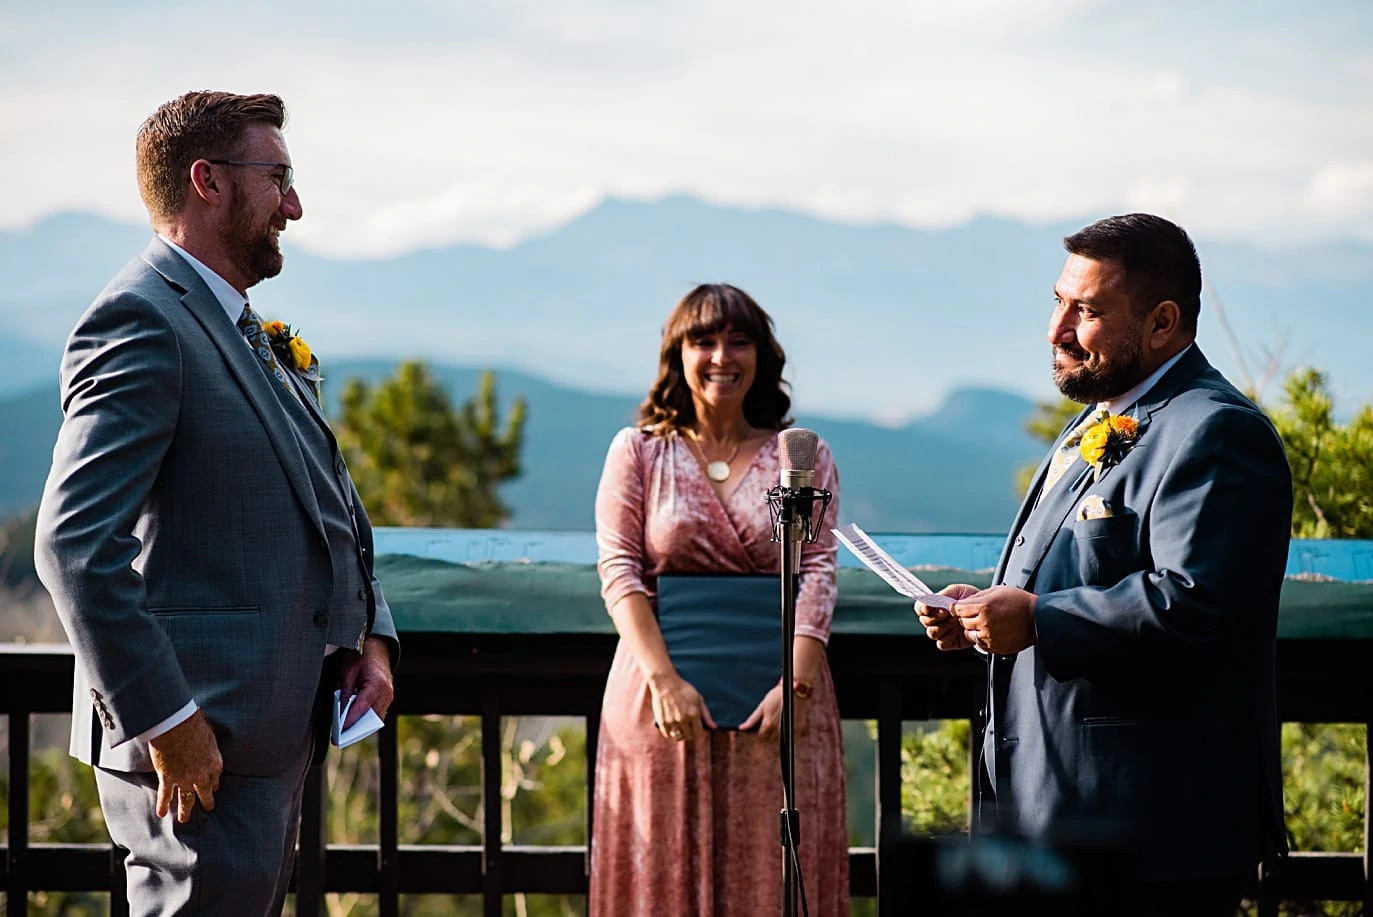 beautiful views at Panorama point during LGBTQ wedding by Colorado LGBT photographer Jennie Crate